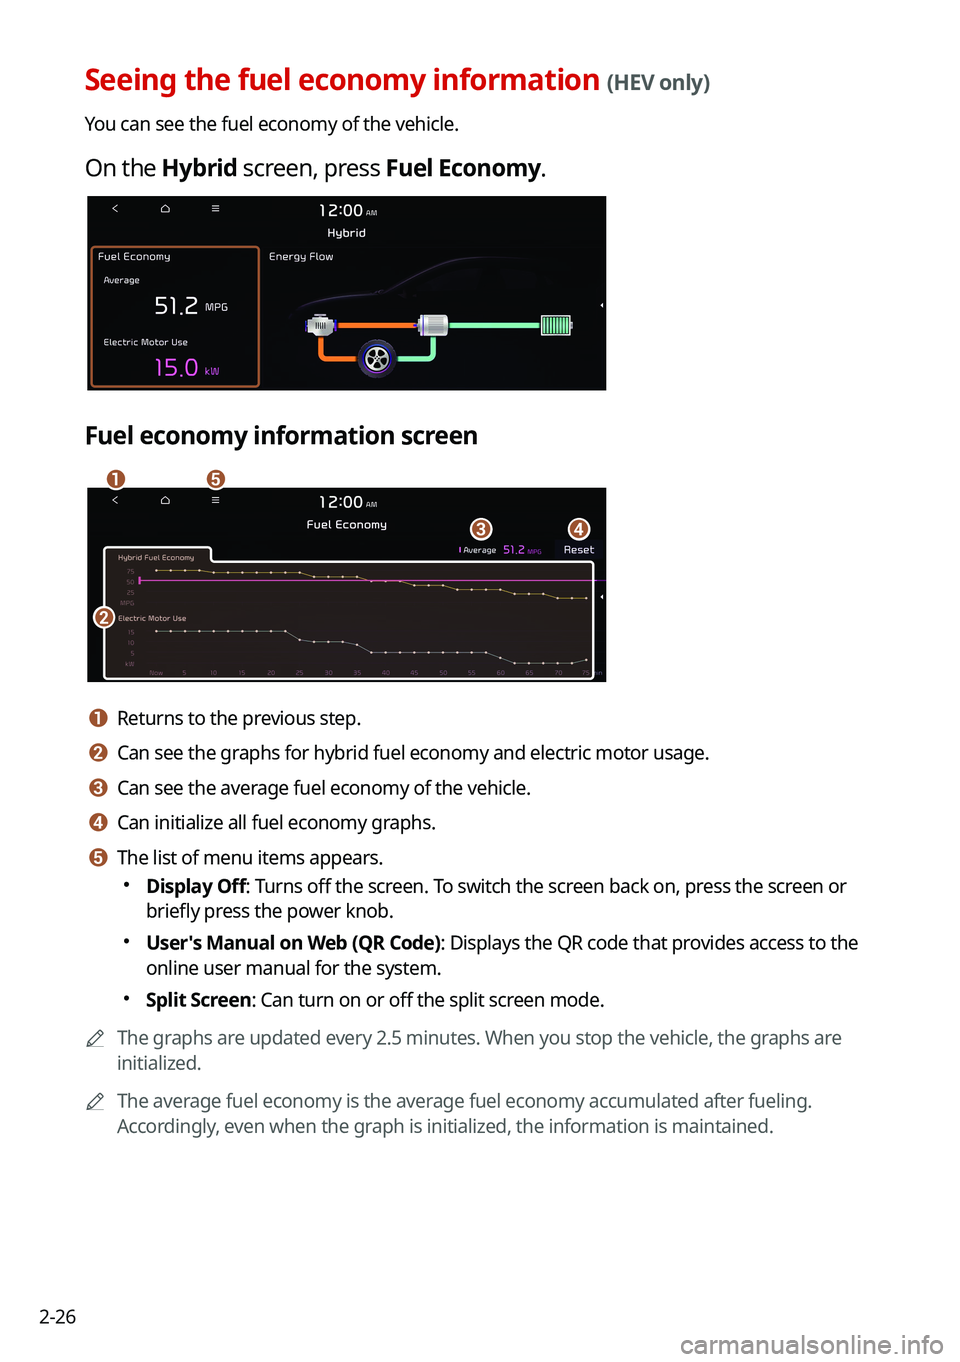 KIA NIRO 2021  Navigation System Quick Reference Guide 2-26
Seeing the fuel economy information (HEV only)
You can see the fuel economy of the vehicle.
On the Hybrid screen, press Fuel Economy.
Fuel economy information screen
\037\036
\035
\034\033
a a Re